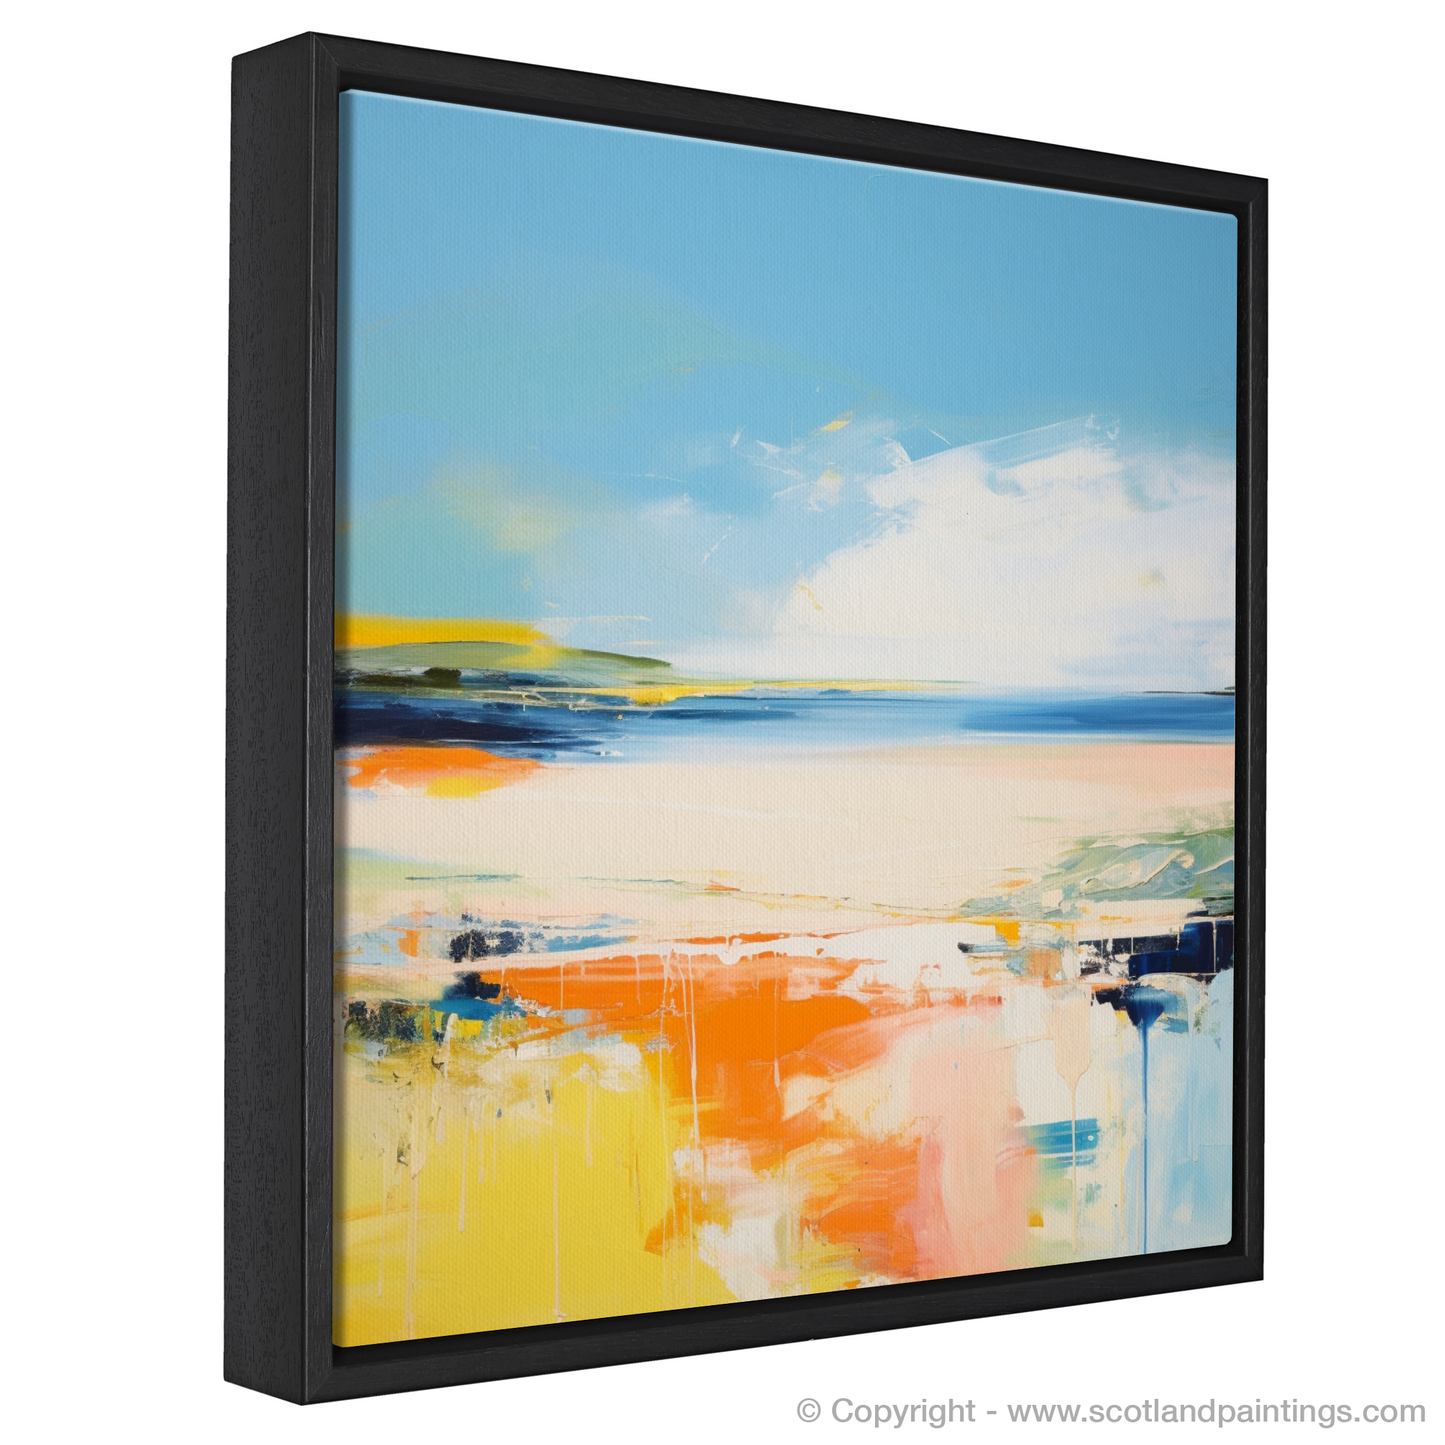 Painting and Art Print of Lunan Bay, Angus in summer entitled "Lunan Bay Summerscape: An Abstract Odyssey".